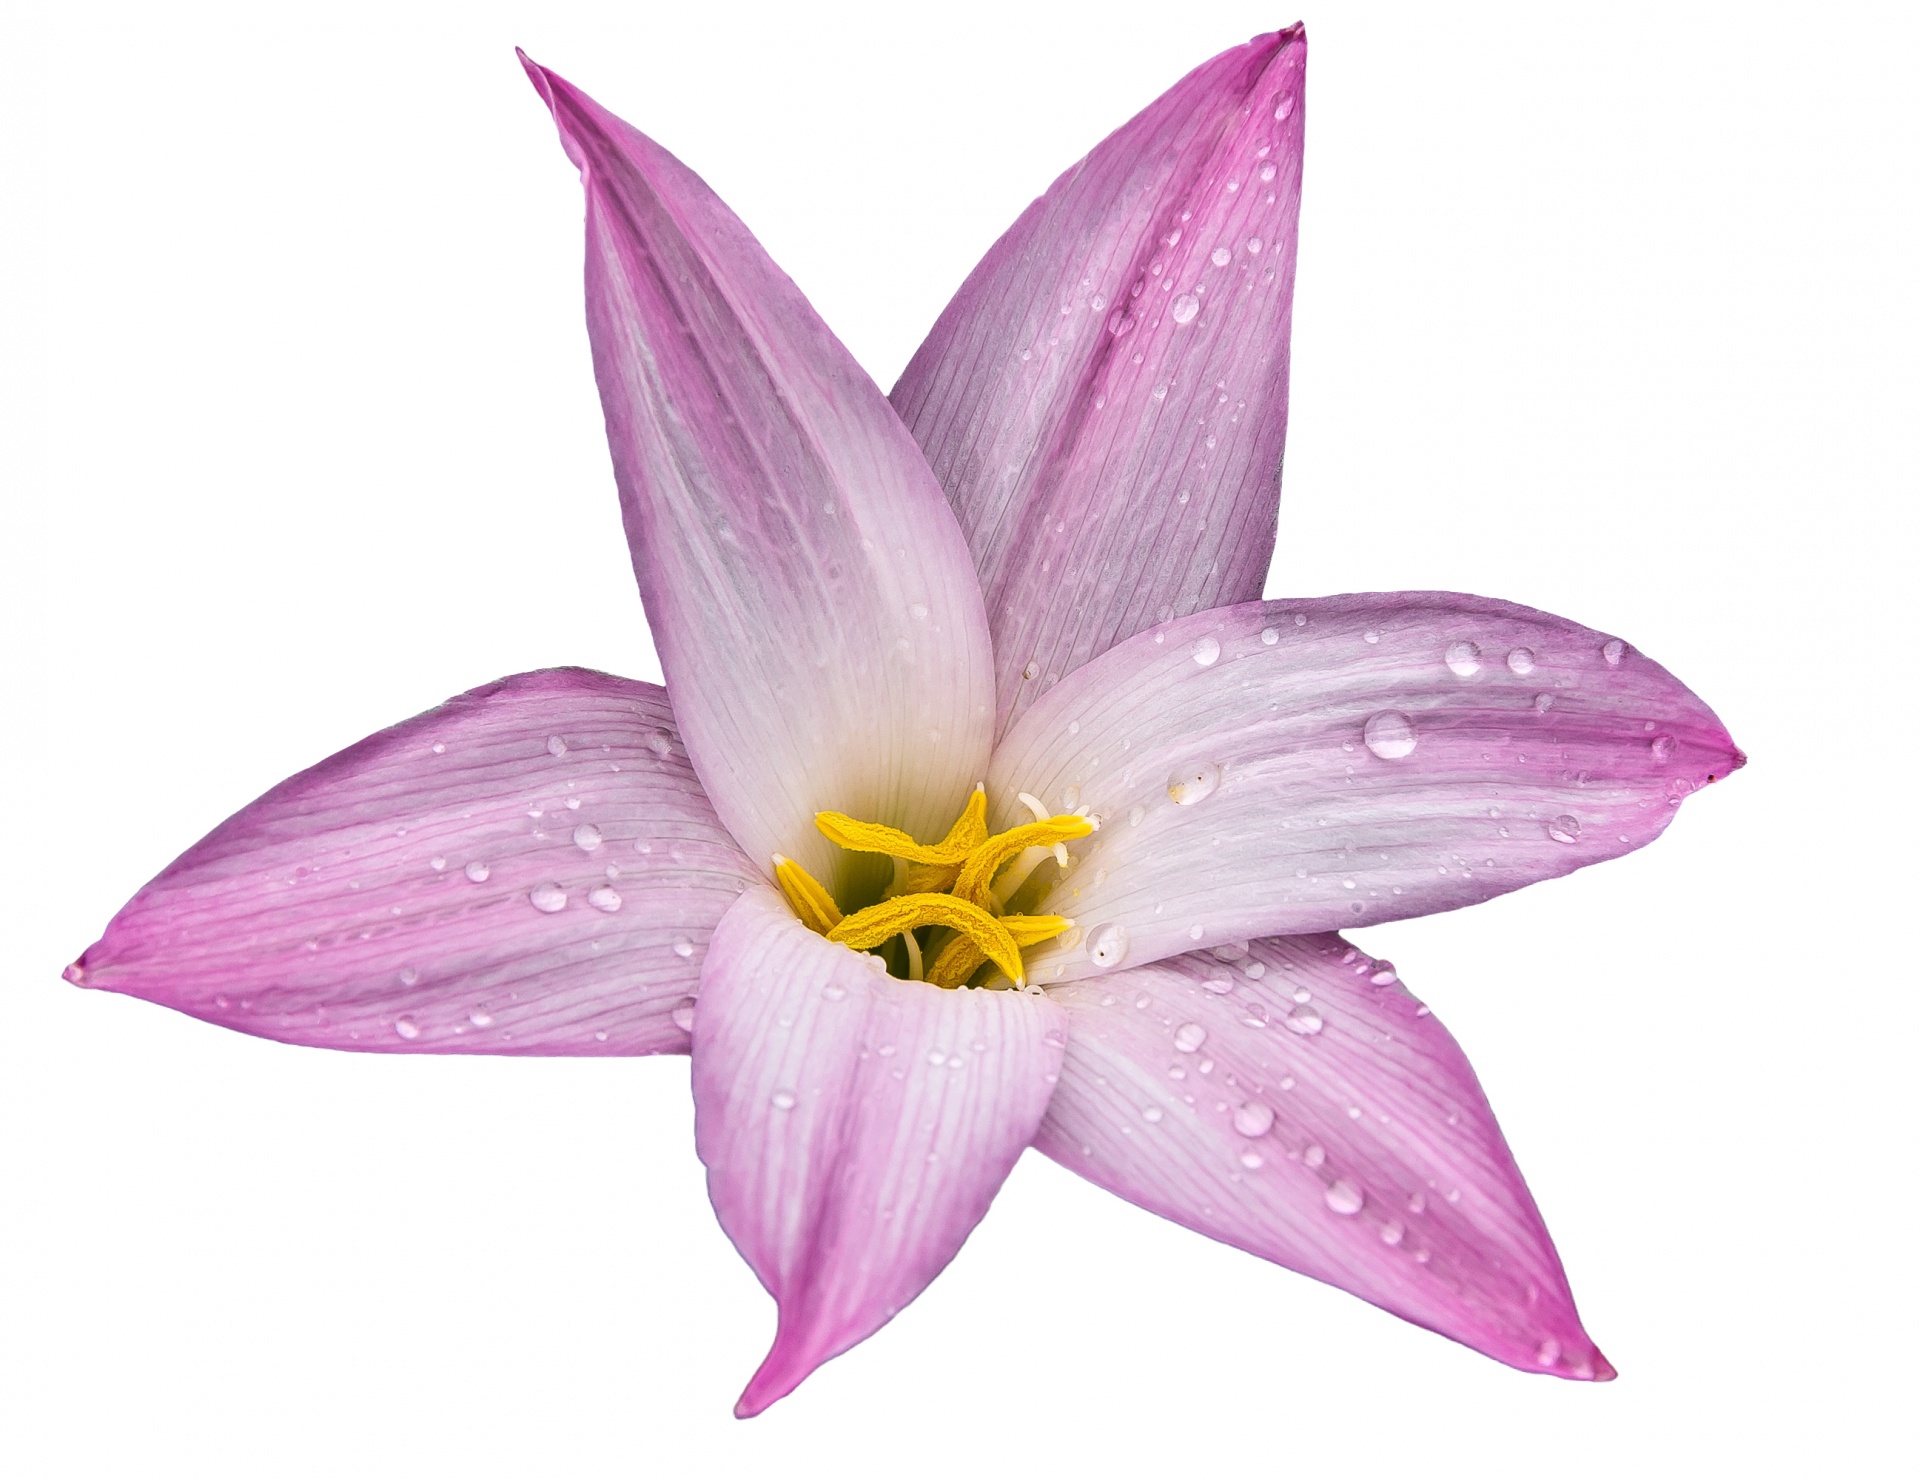 lily flower bloom free photo